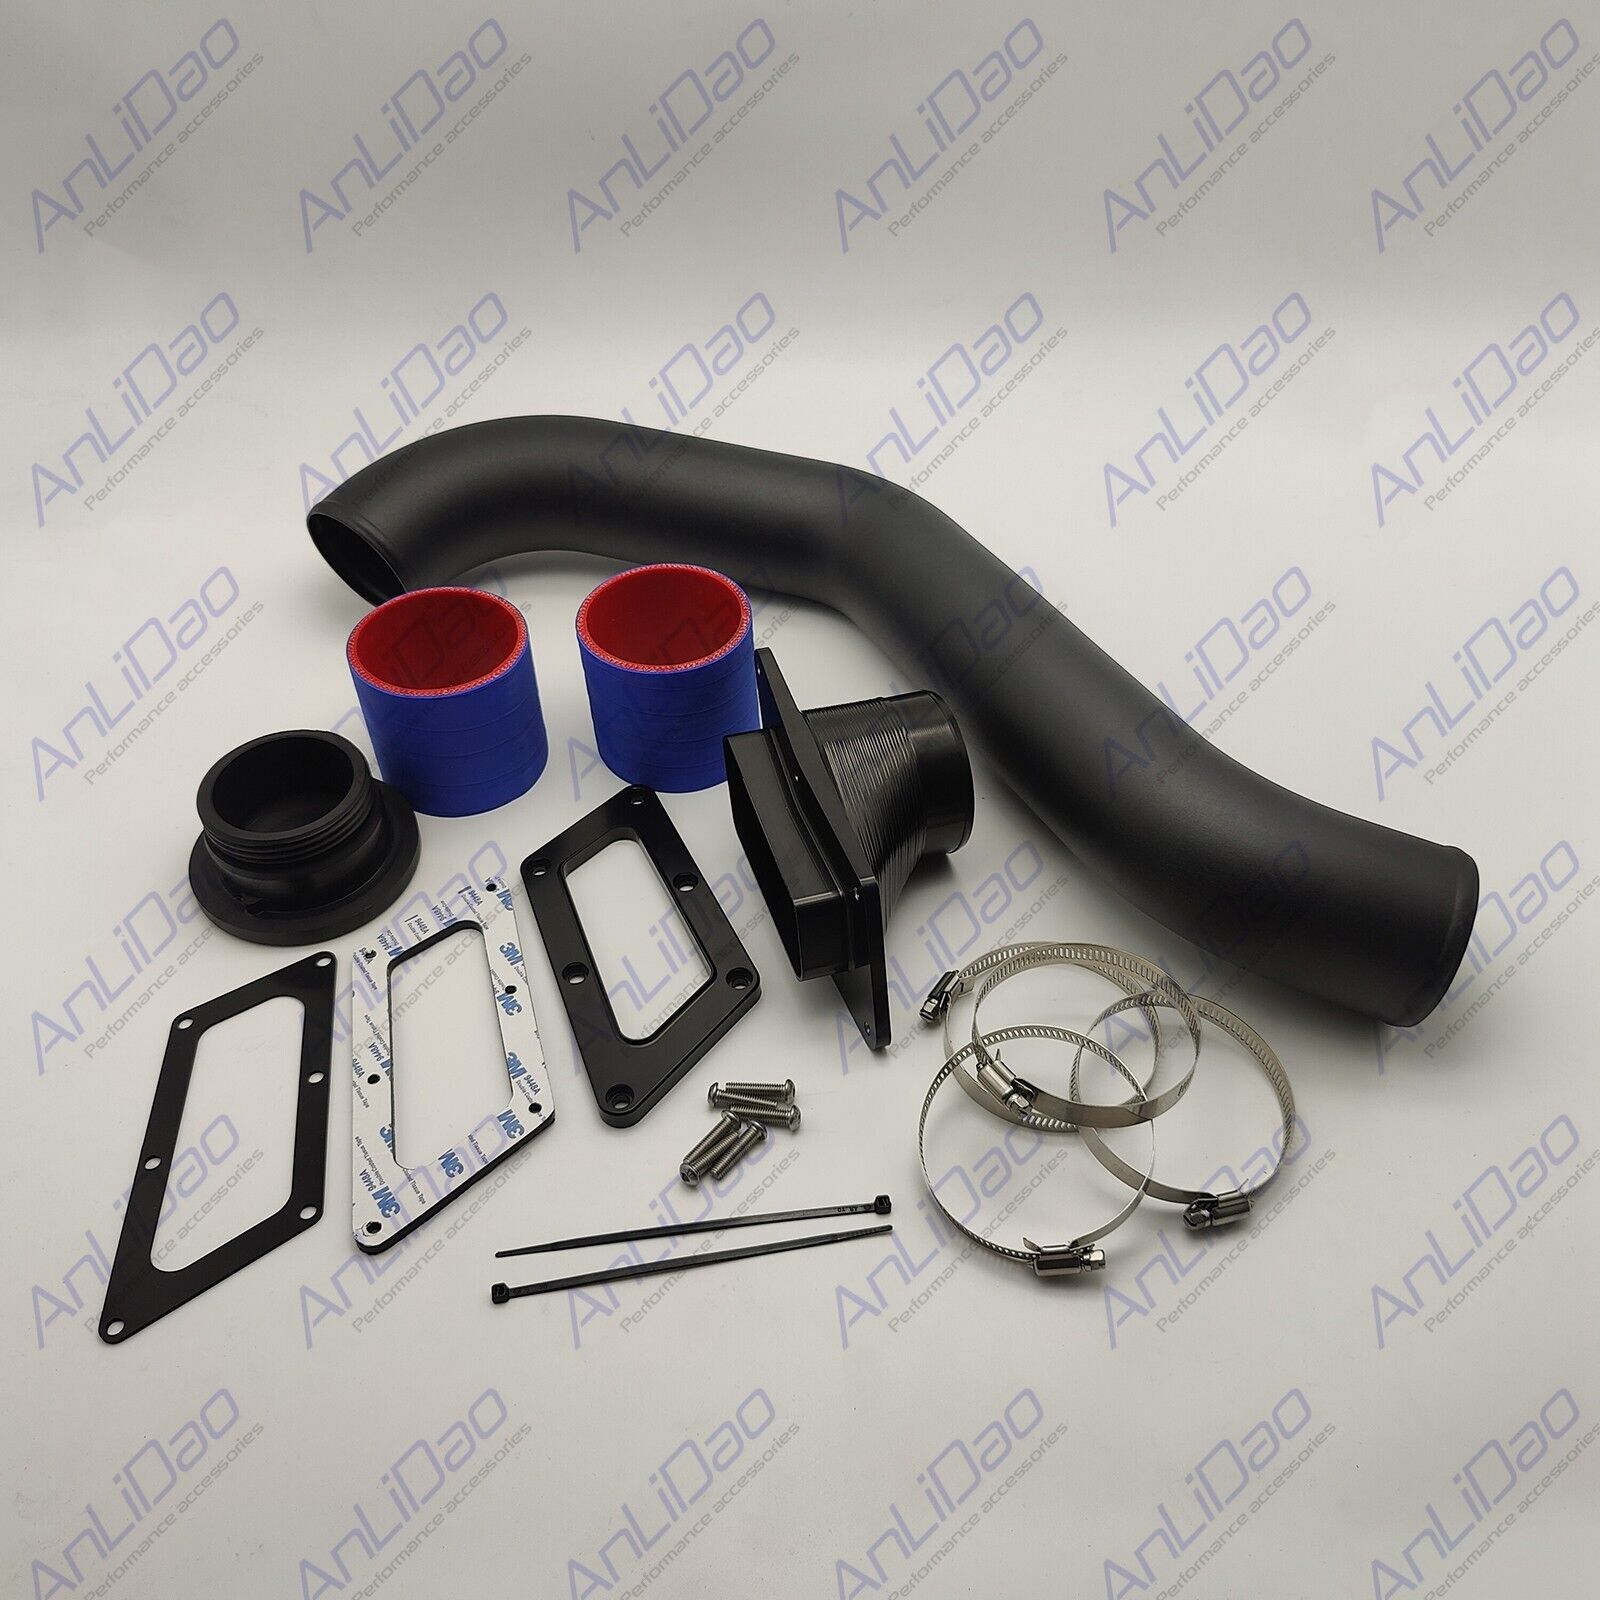 RS15190 Replaces Fit For SeaDoo RXP RACING Rear Exit Exhaust Kit